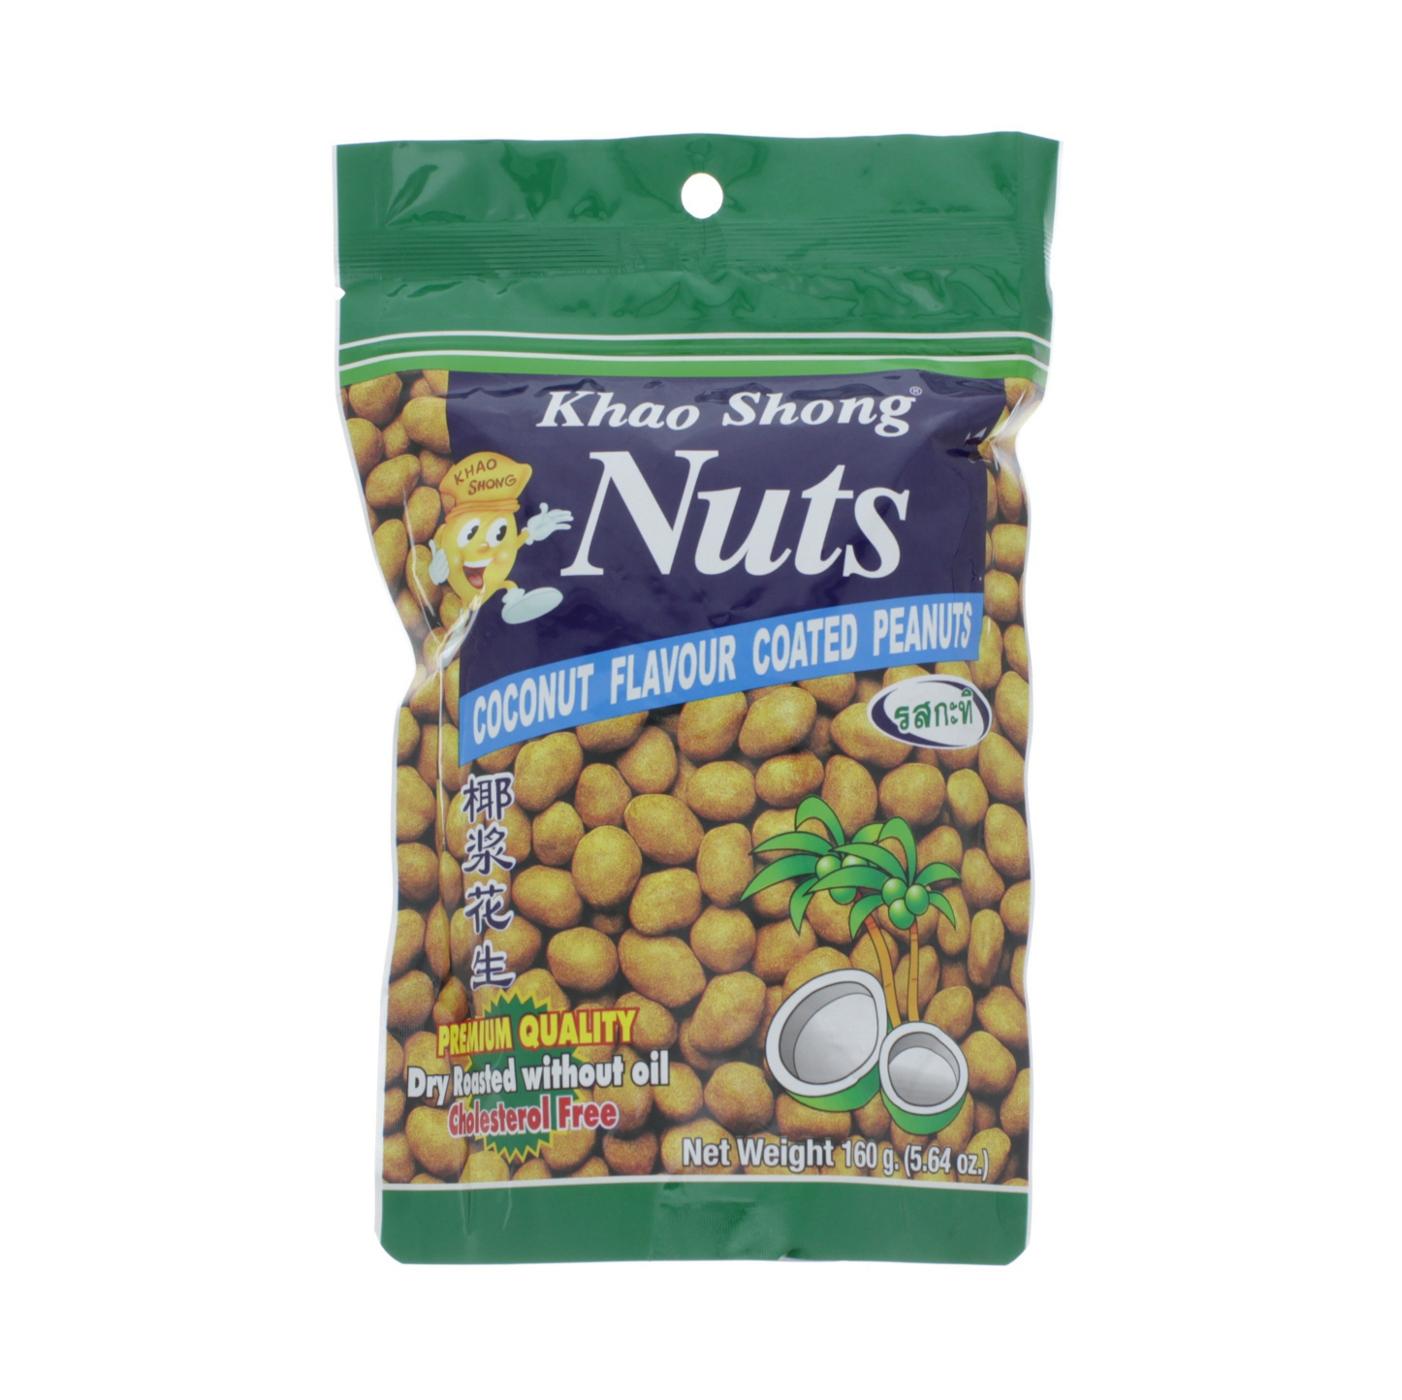 Khao Shong Coconut Flavour Coated Peanuts; image 1 of 2